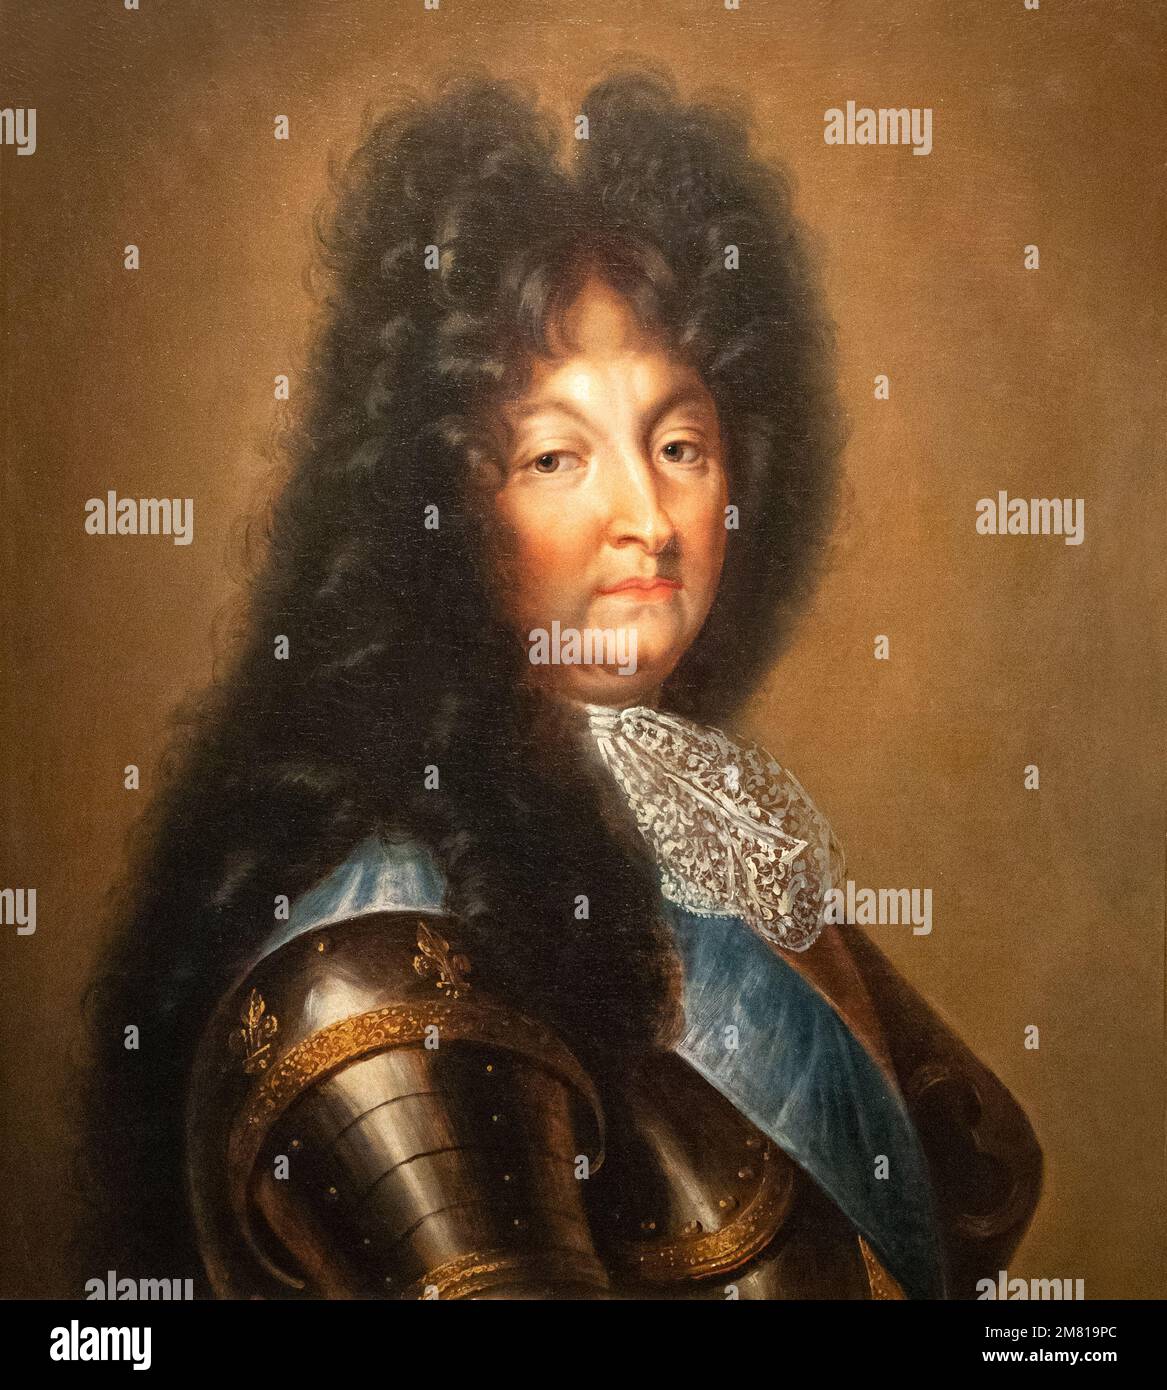 Portrait of King Louis XIV of France, King for 72 years from 1643 - 1715. Painting from Paris after 1694, in the Wawel Castle Museum Krakow Poland Stock Photo